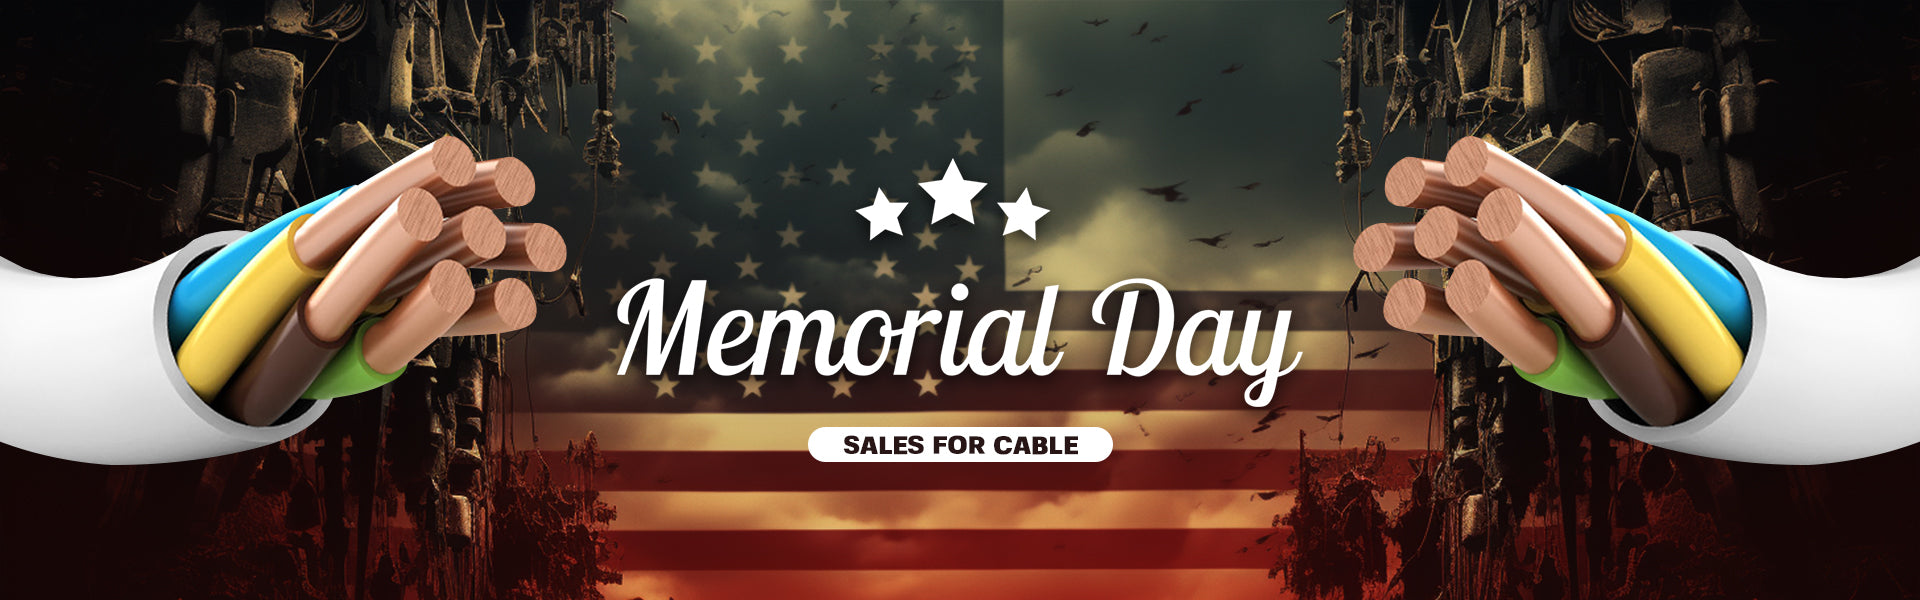 Memorial Day - Cable Sale